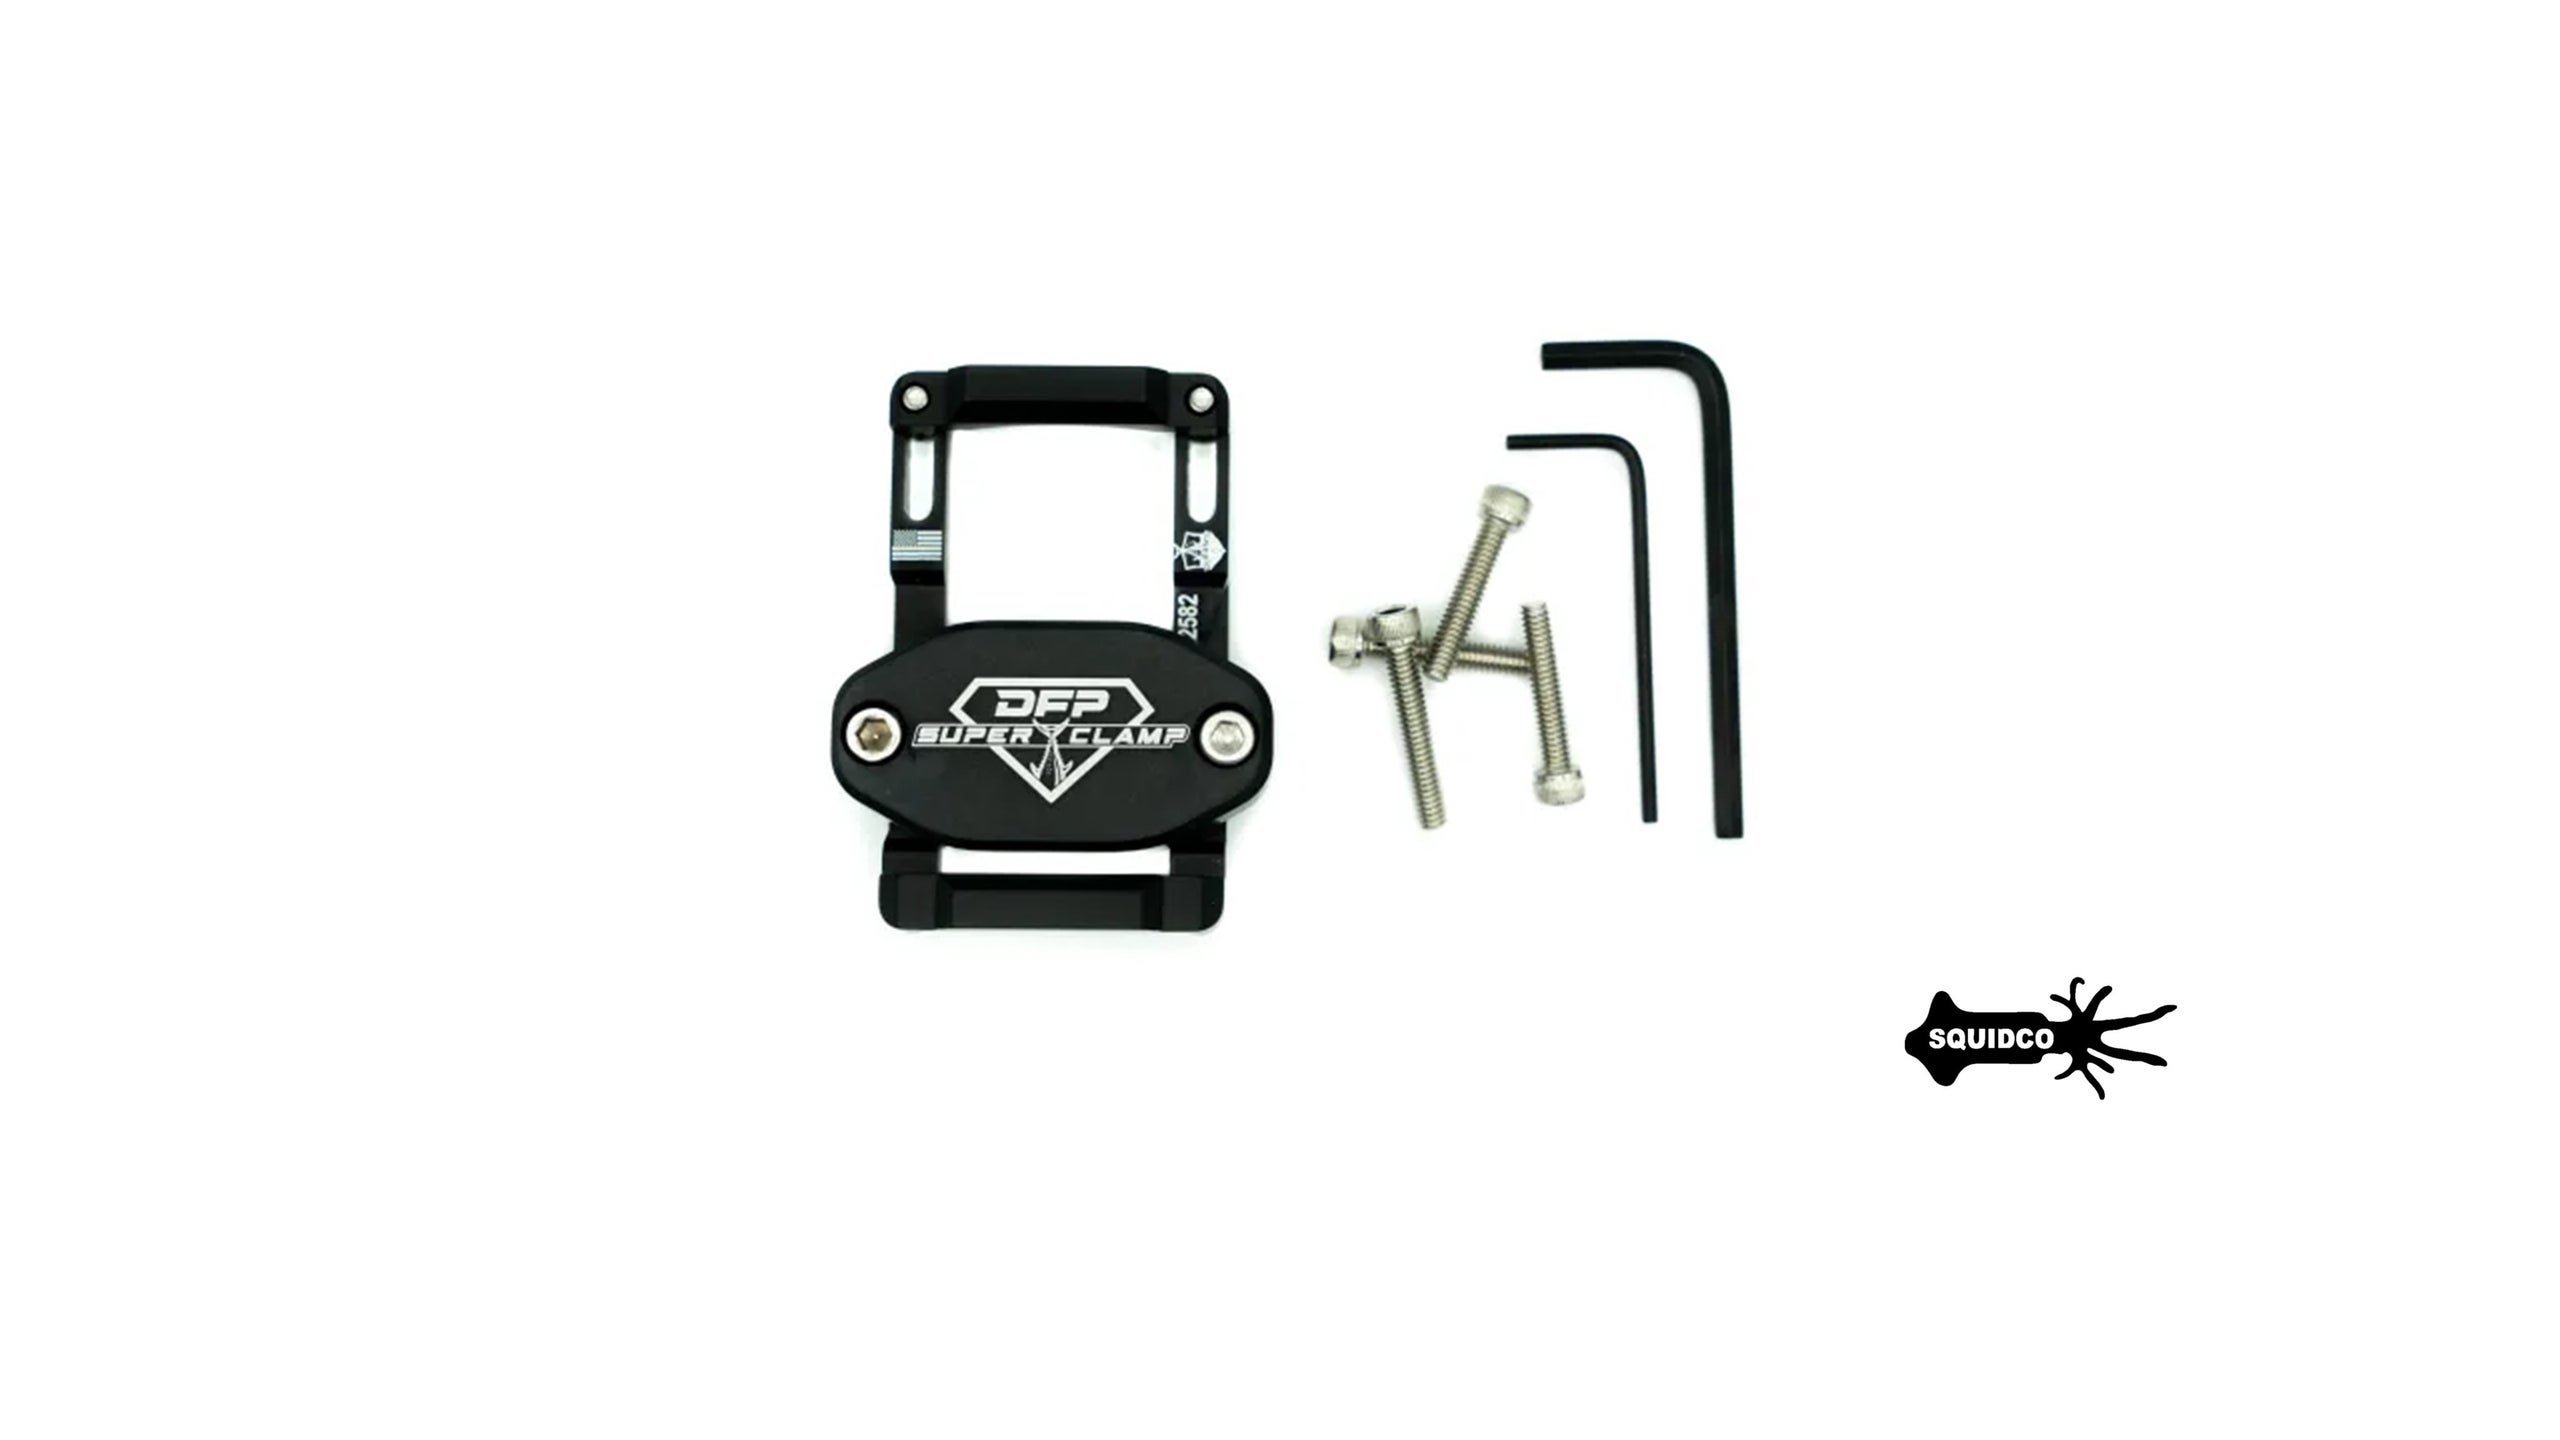 Duran's Fishing Products Super Clamp